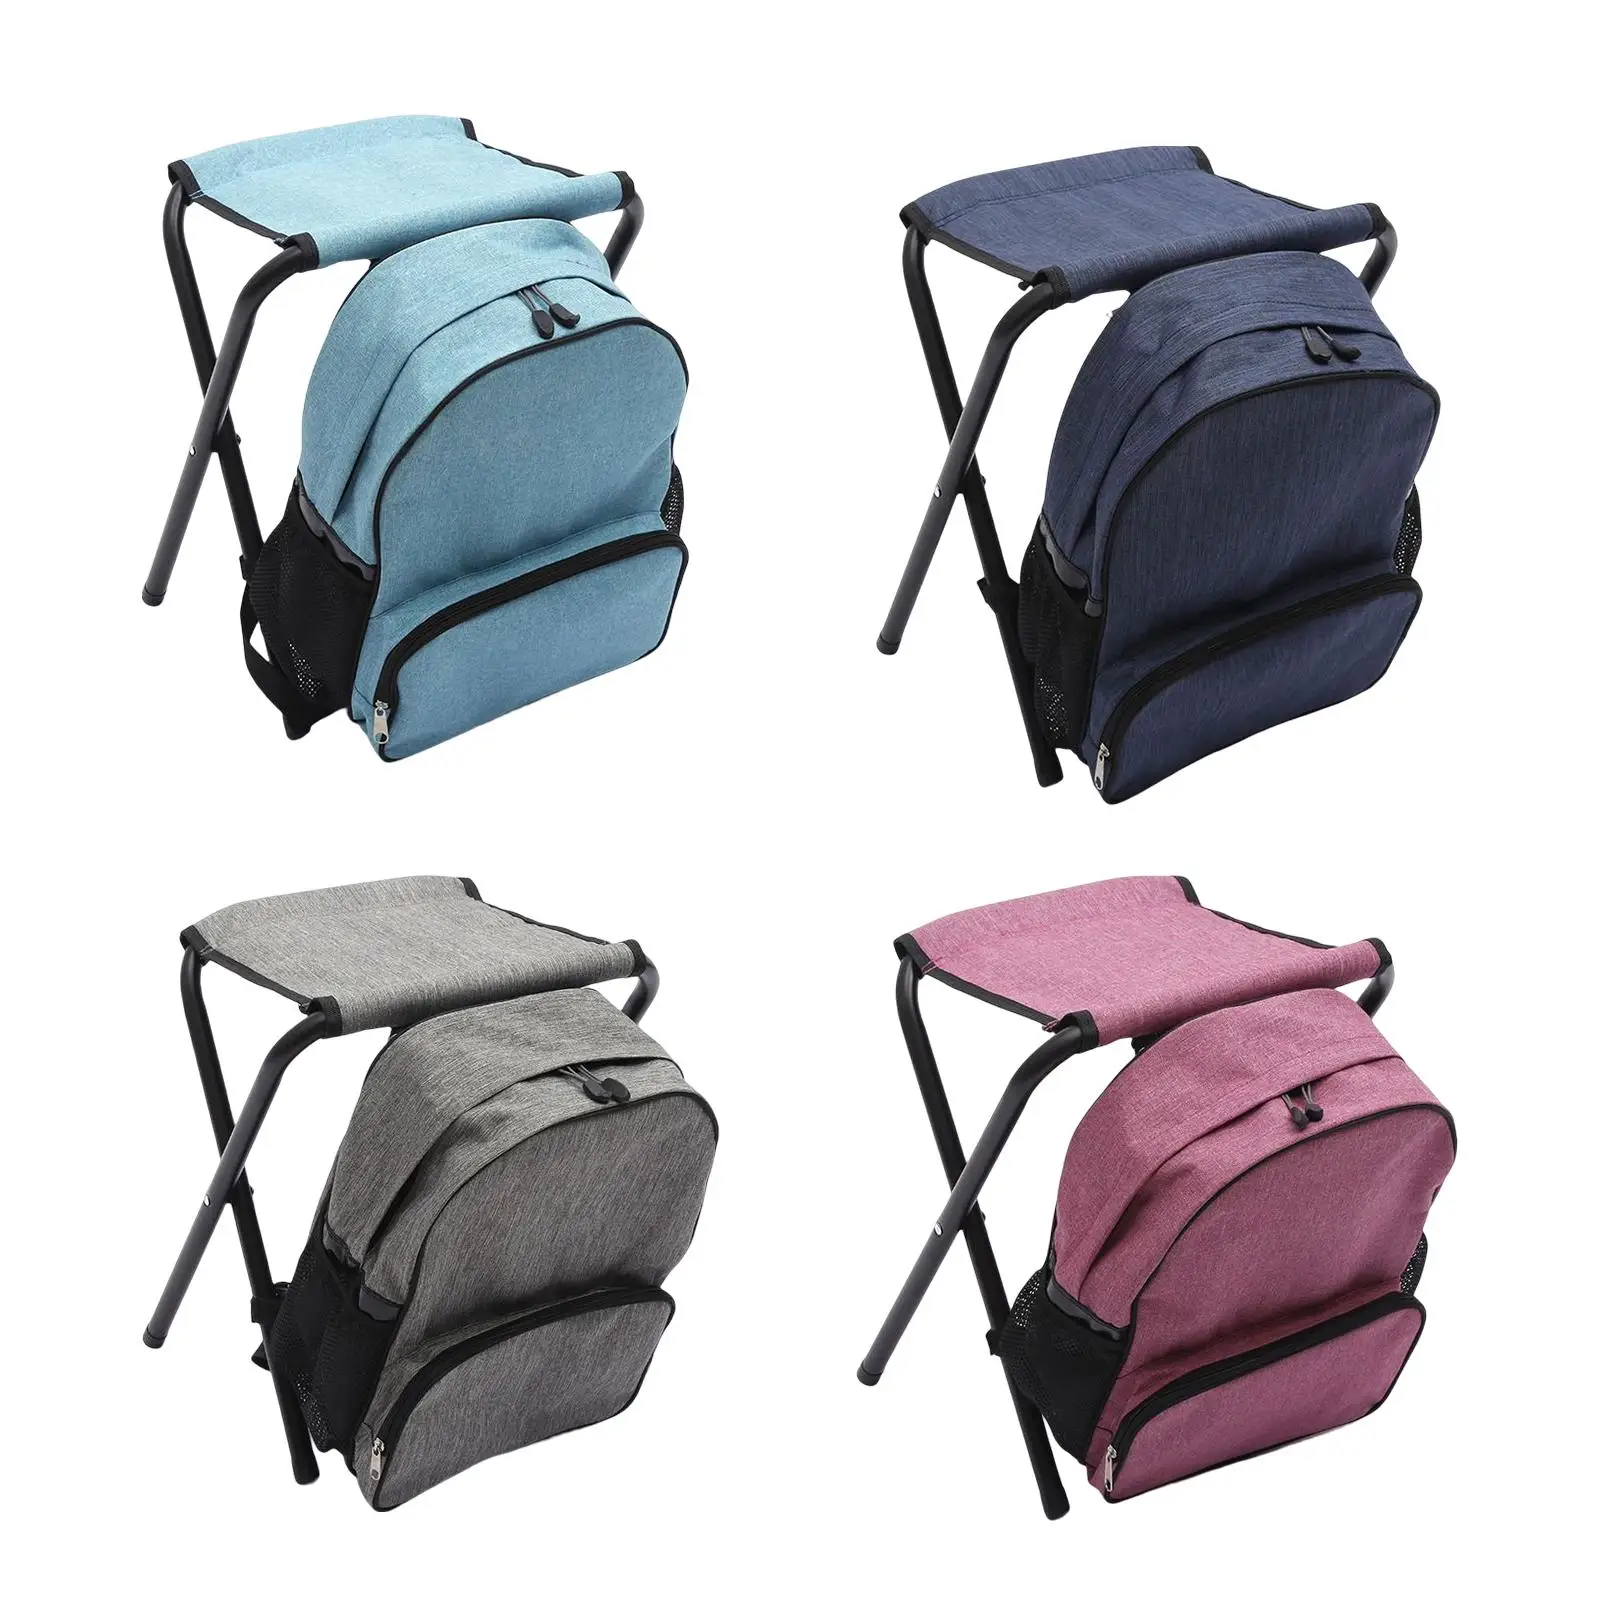 Fishing Seat Portable Detachable Backpack Seat Chair Camp Stool Foldable Stool with Bag for Camping Beach Picnic Fishing Hiking